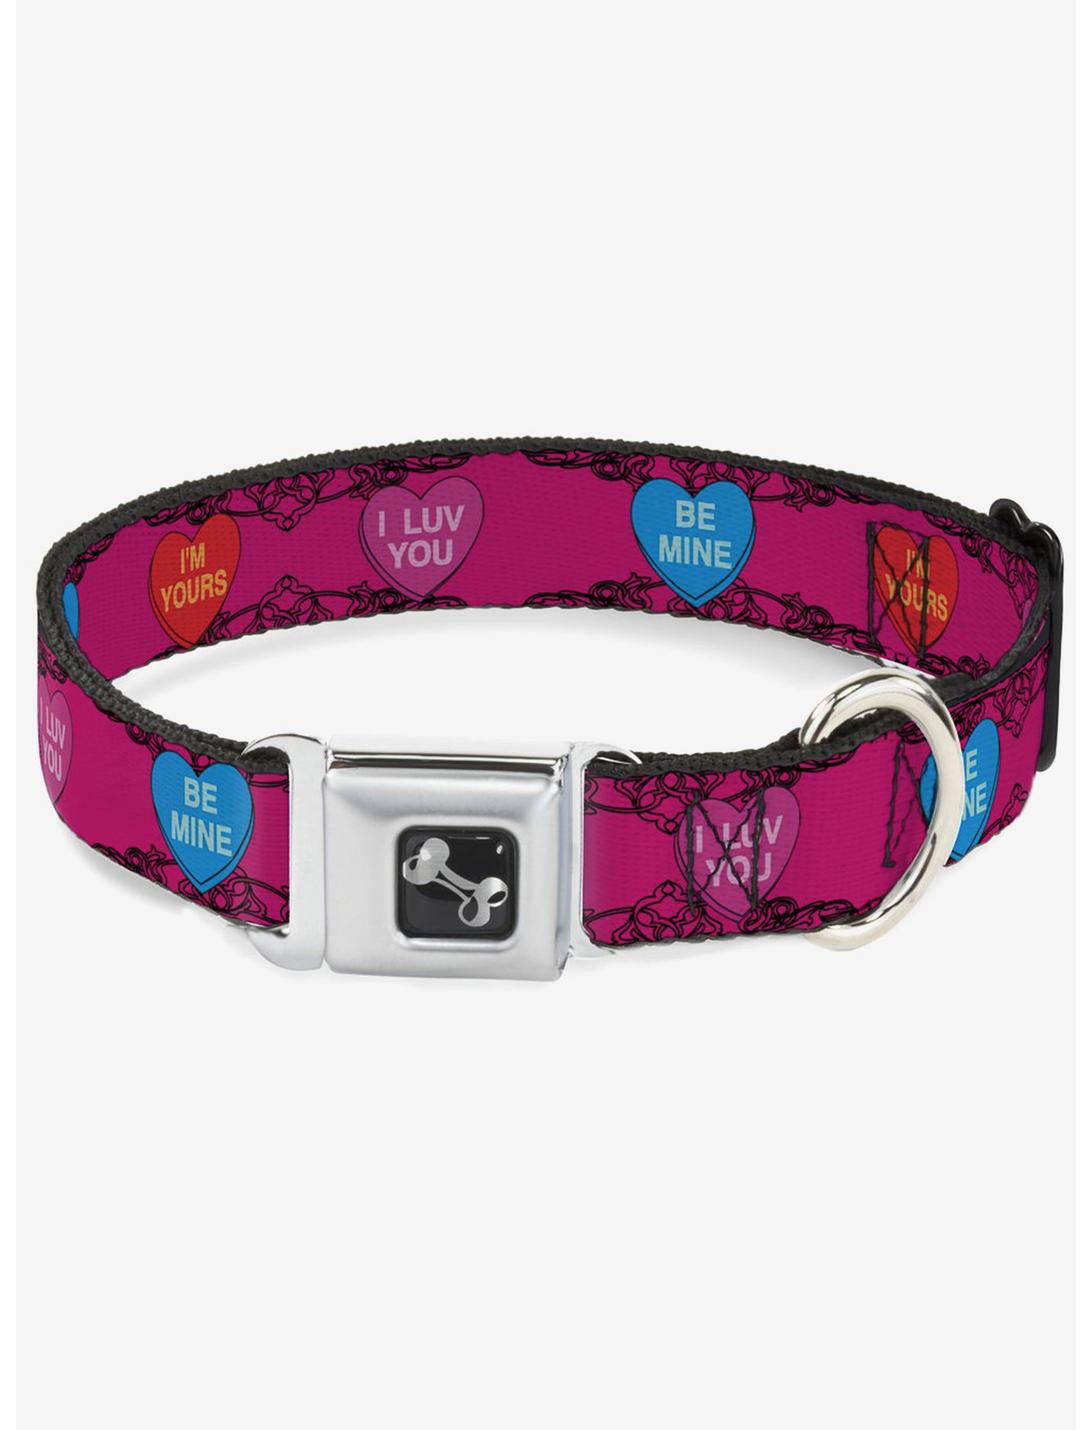 Candy Hearts Seatbelt Buckle Dog Collar, PINK, hi-res